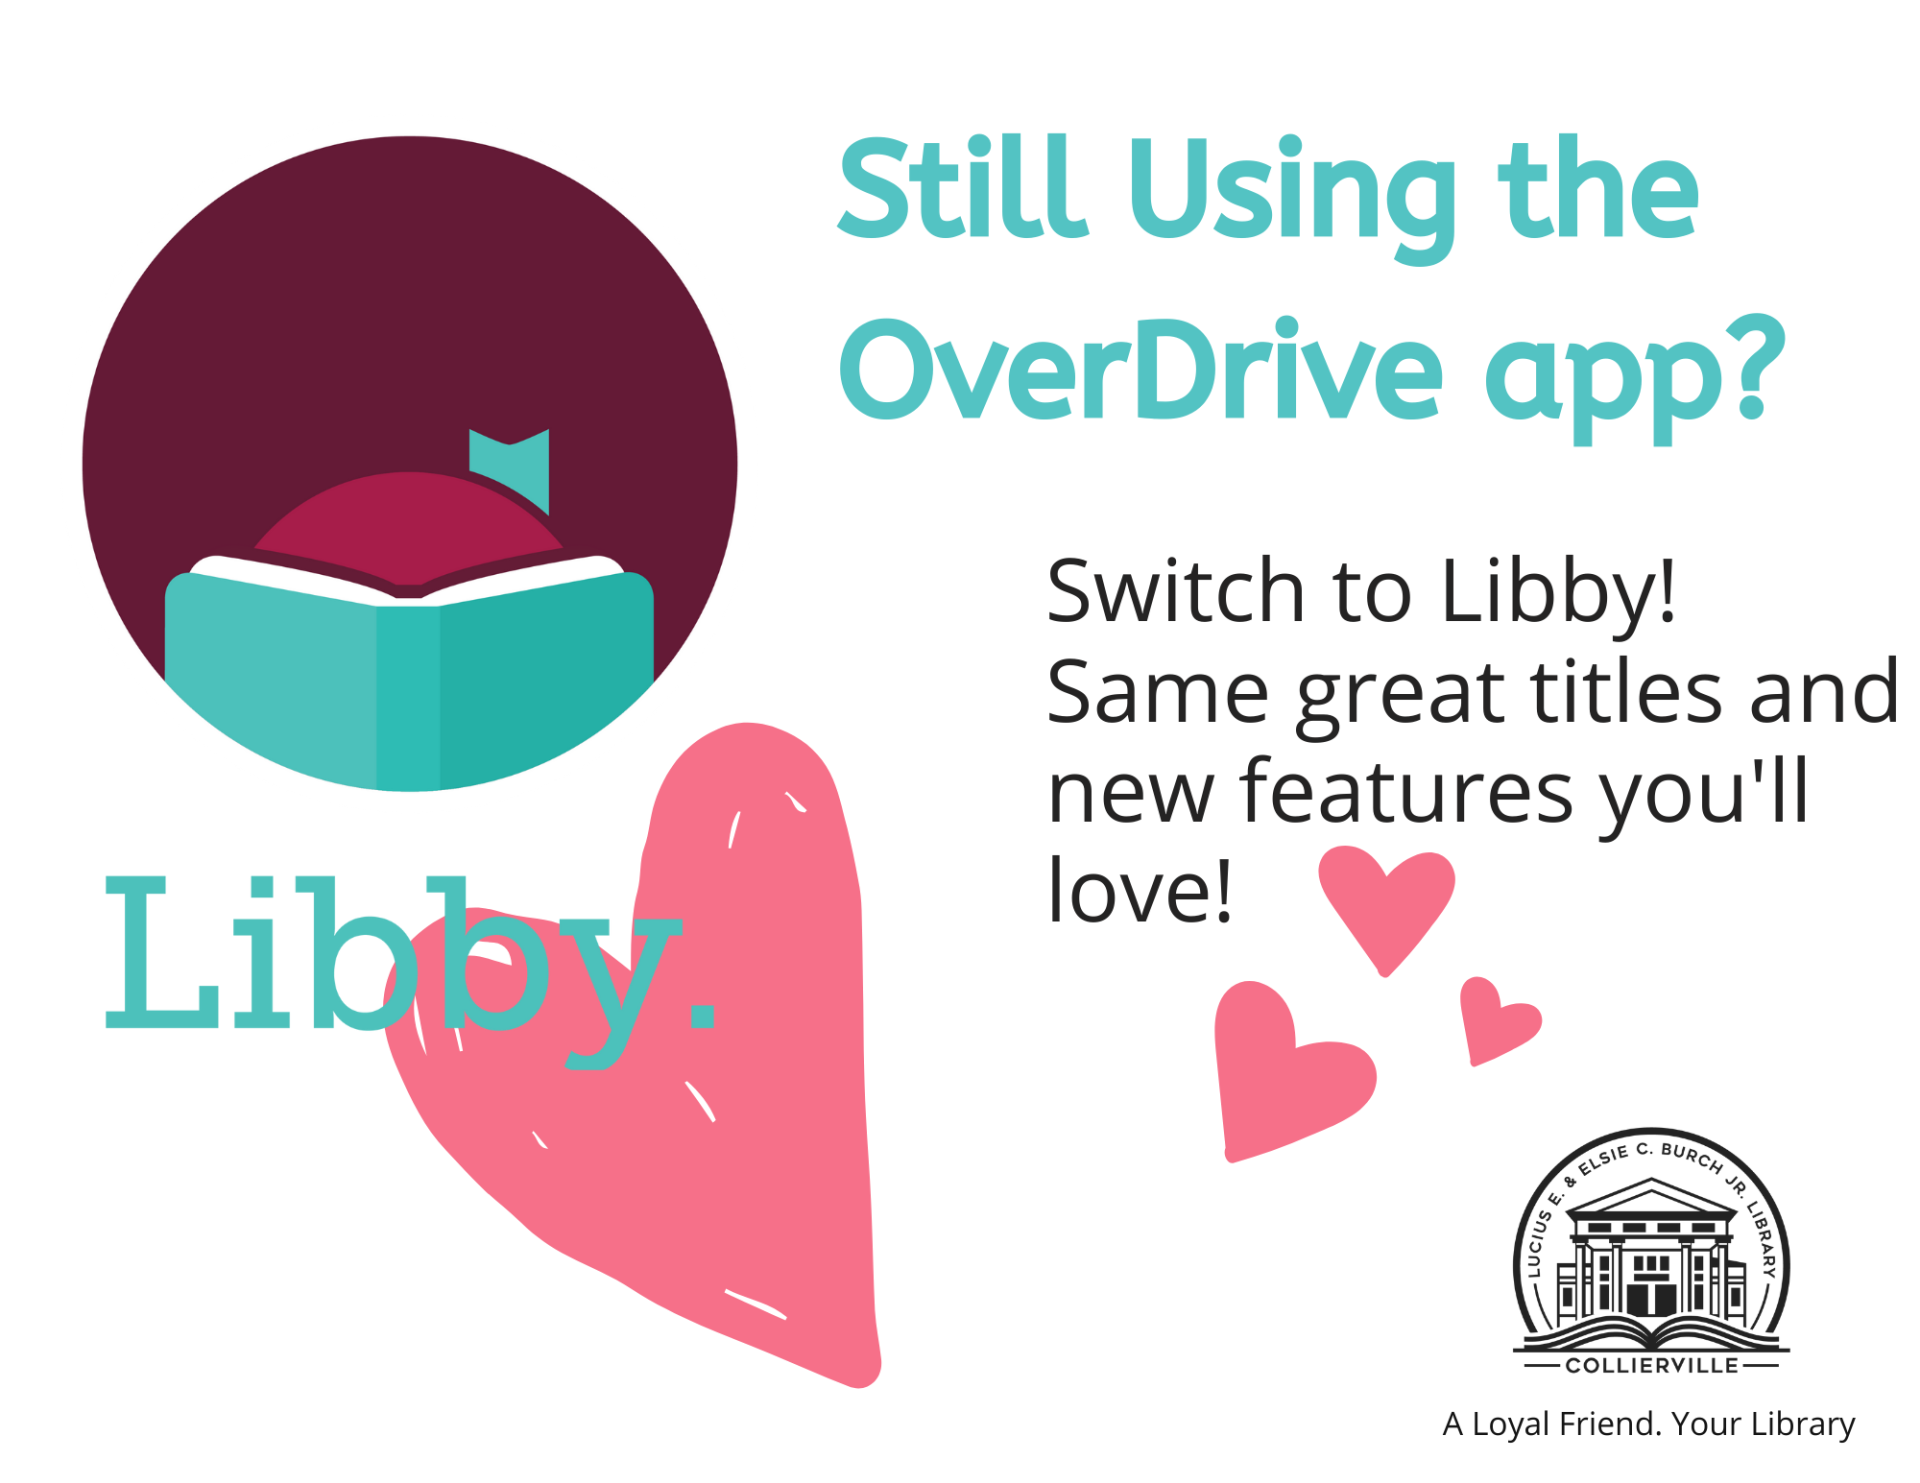 OverDrive app to retire by end of 2022 - switch to Libby!